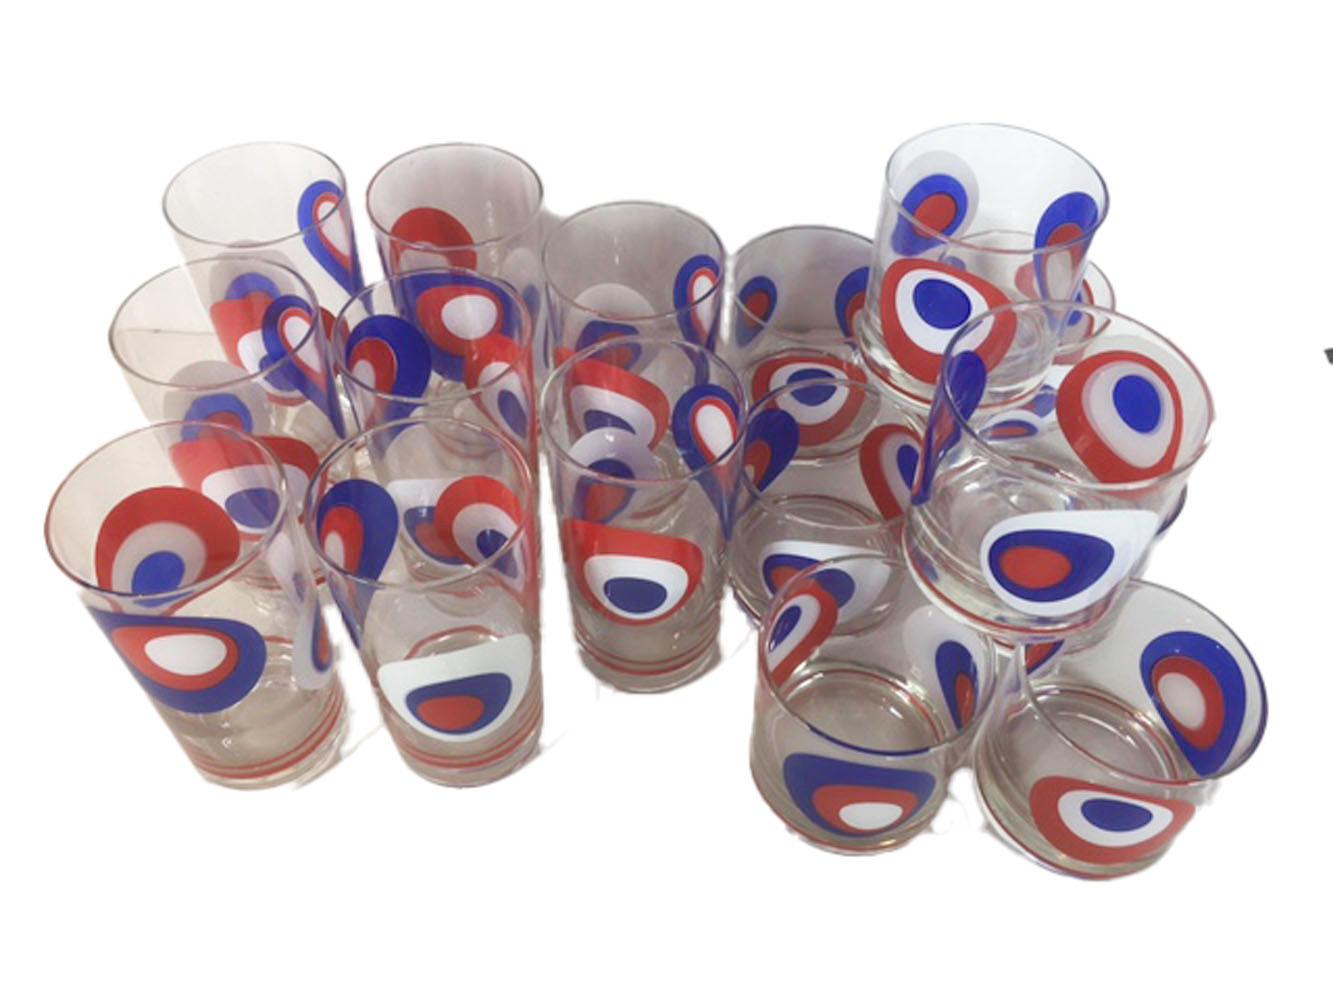 Mid-Century Modern culver barware in a red, white and blue Op-Art / Pop Art pattern each piece with red white and blue circles asymmetrically arranged on another and each in differing order. 

Measures: 8 - Highball: 5-1/2